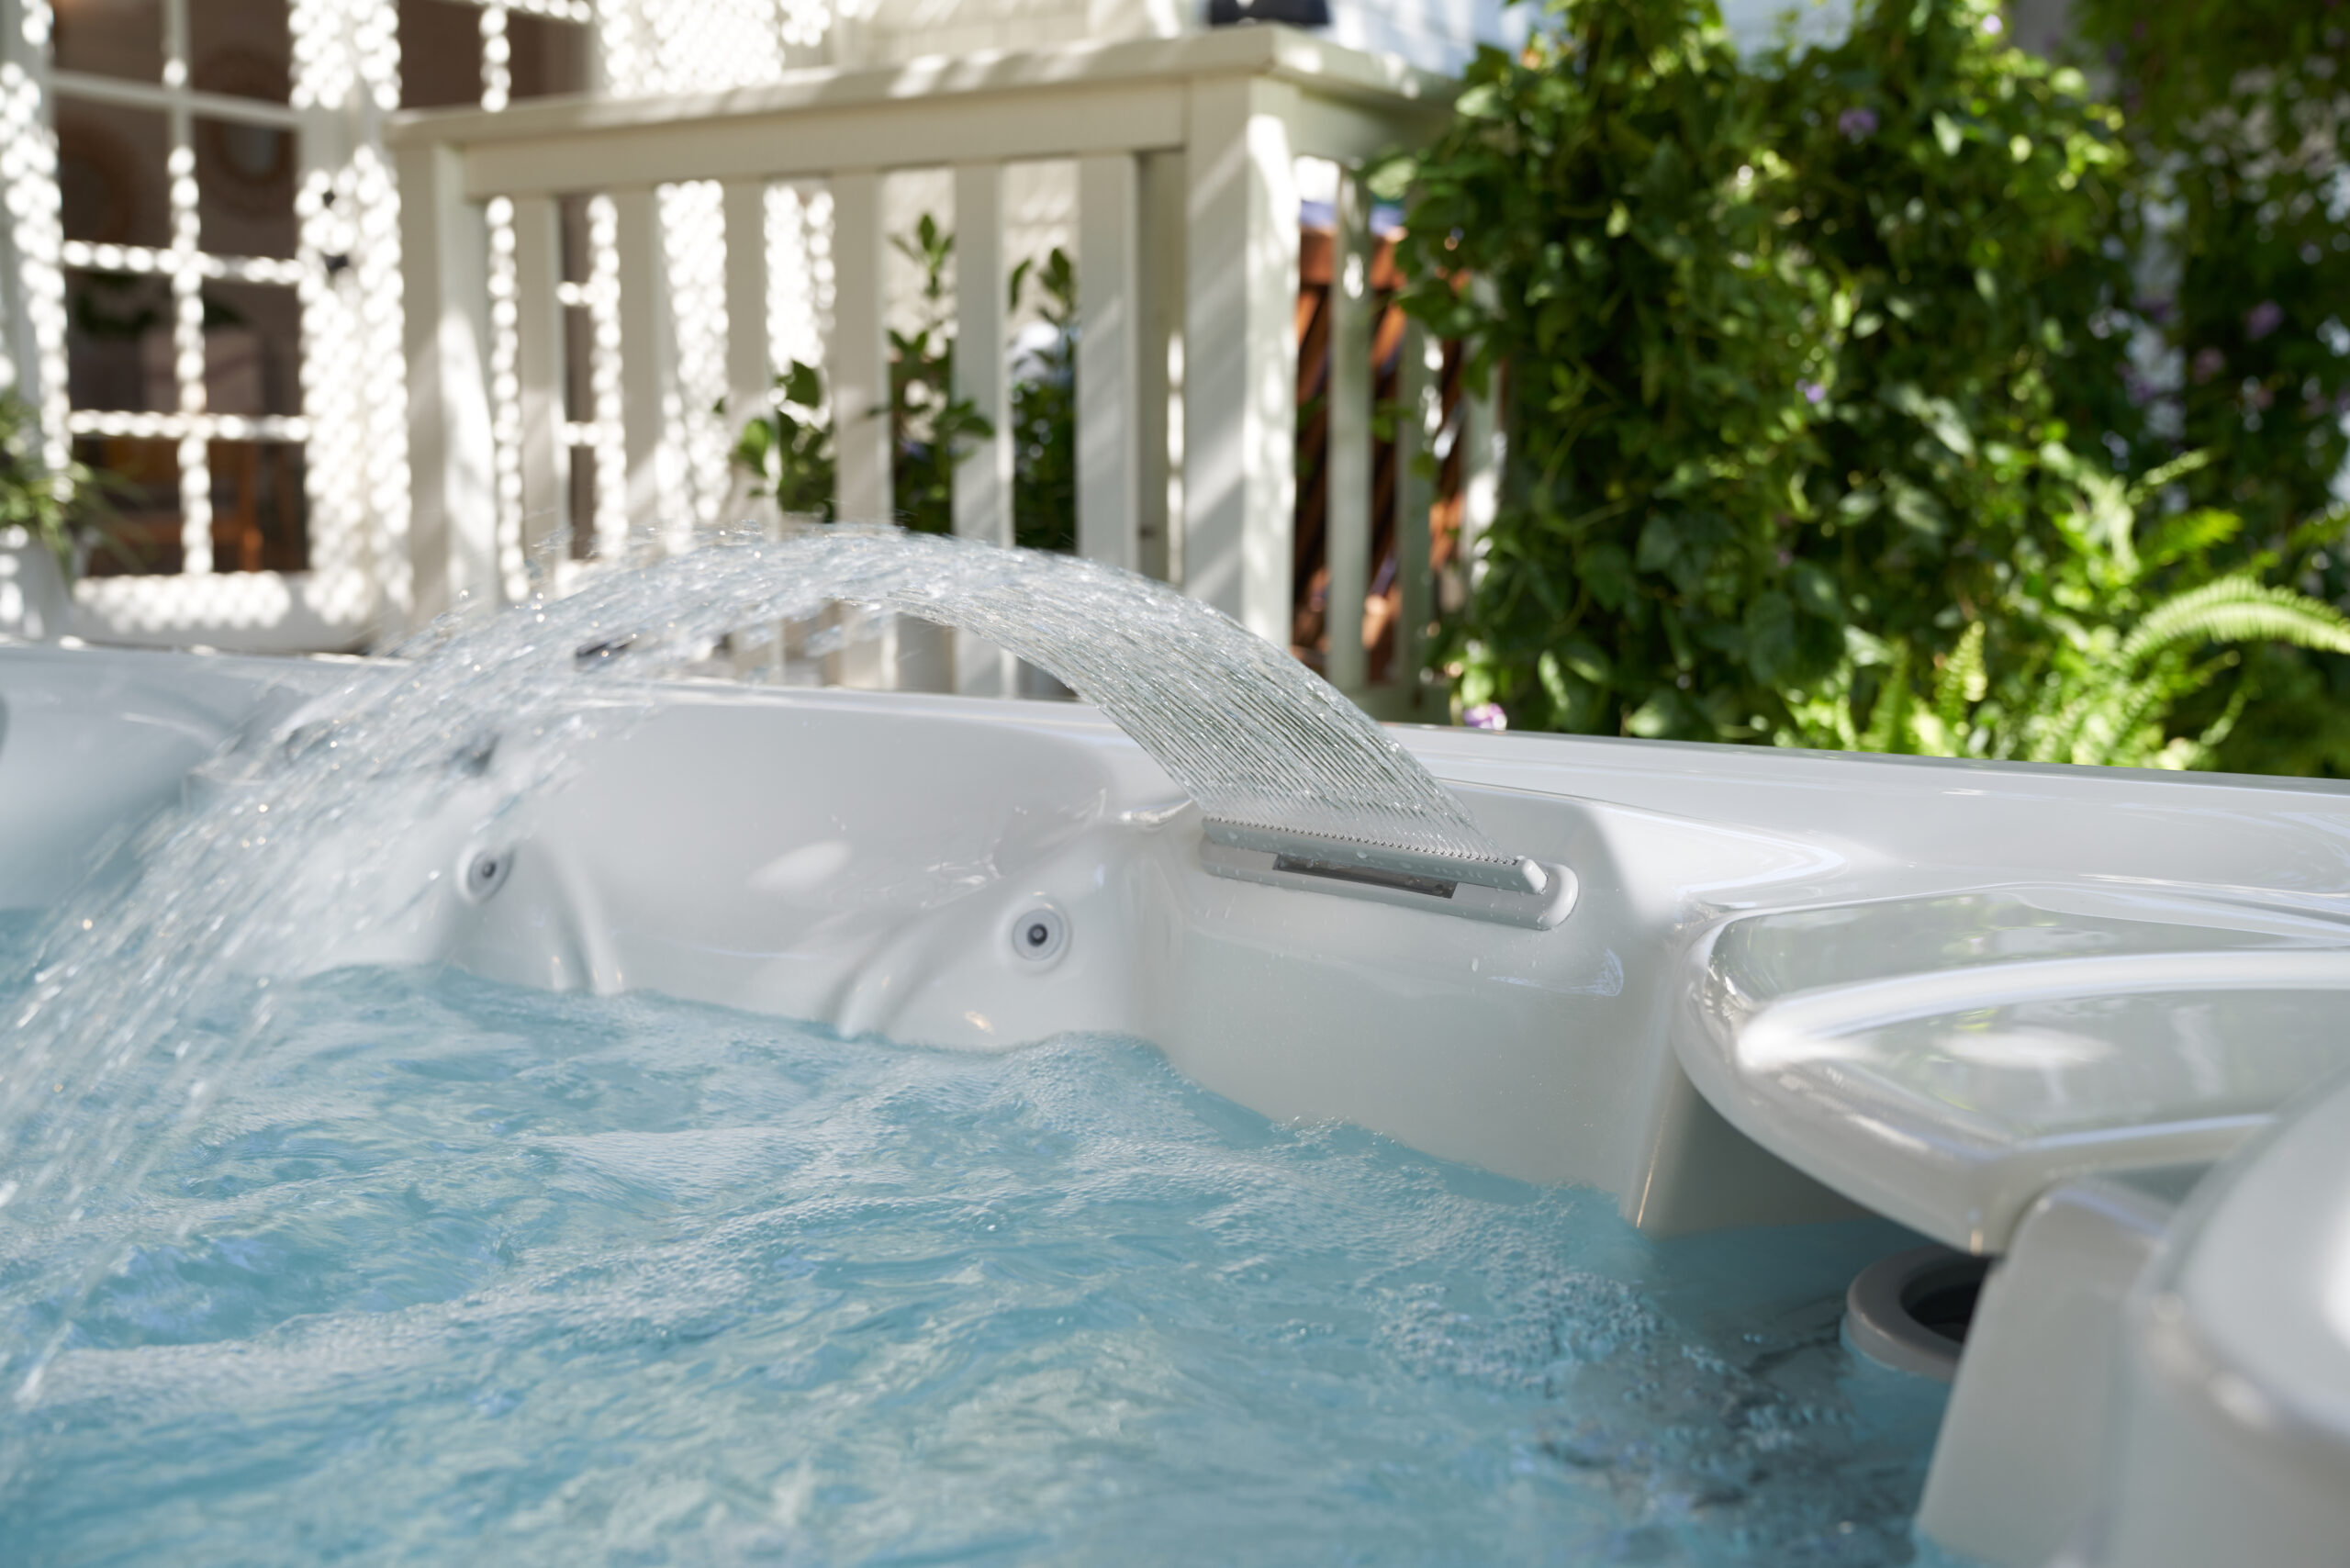 Water features and jets can affect hot tub cost